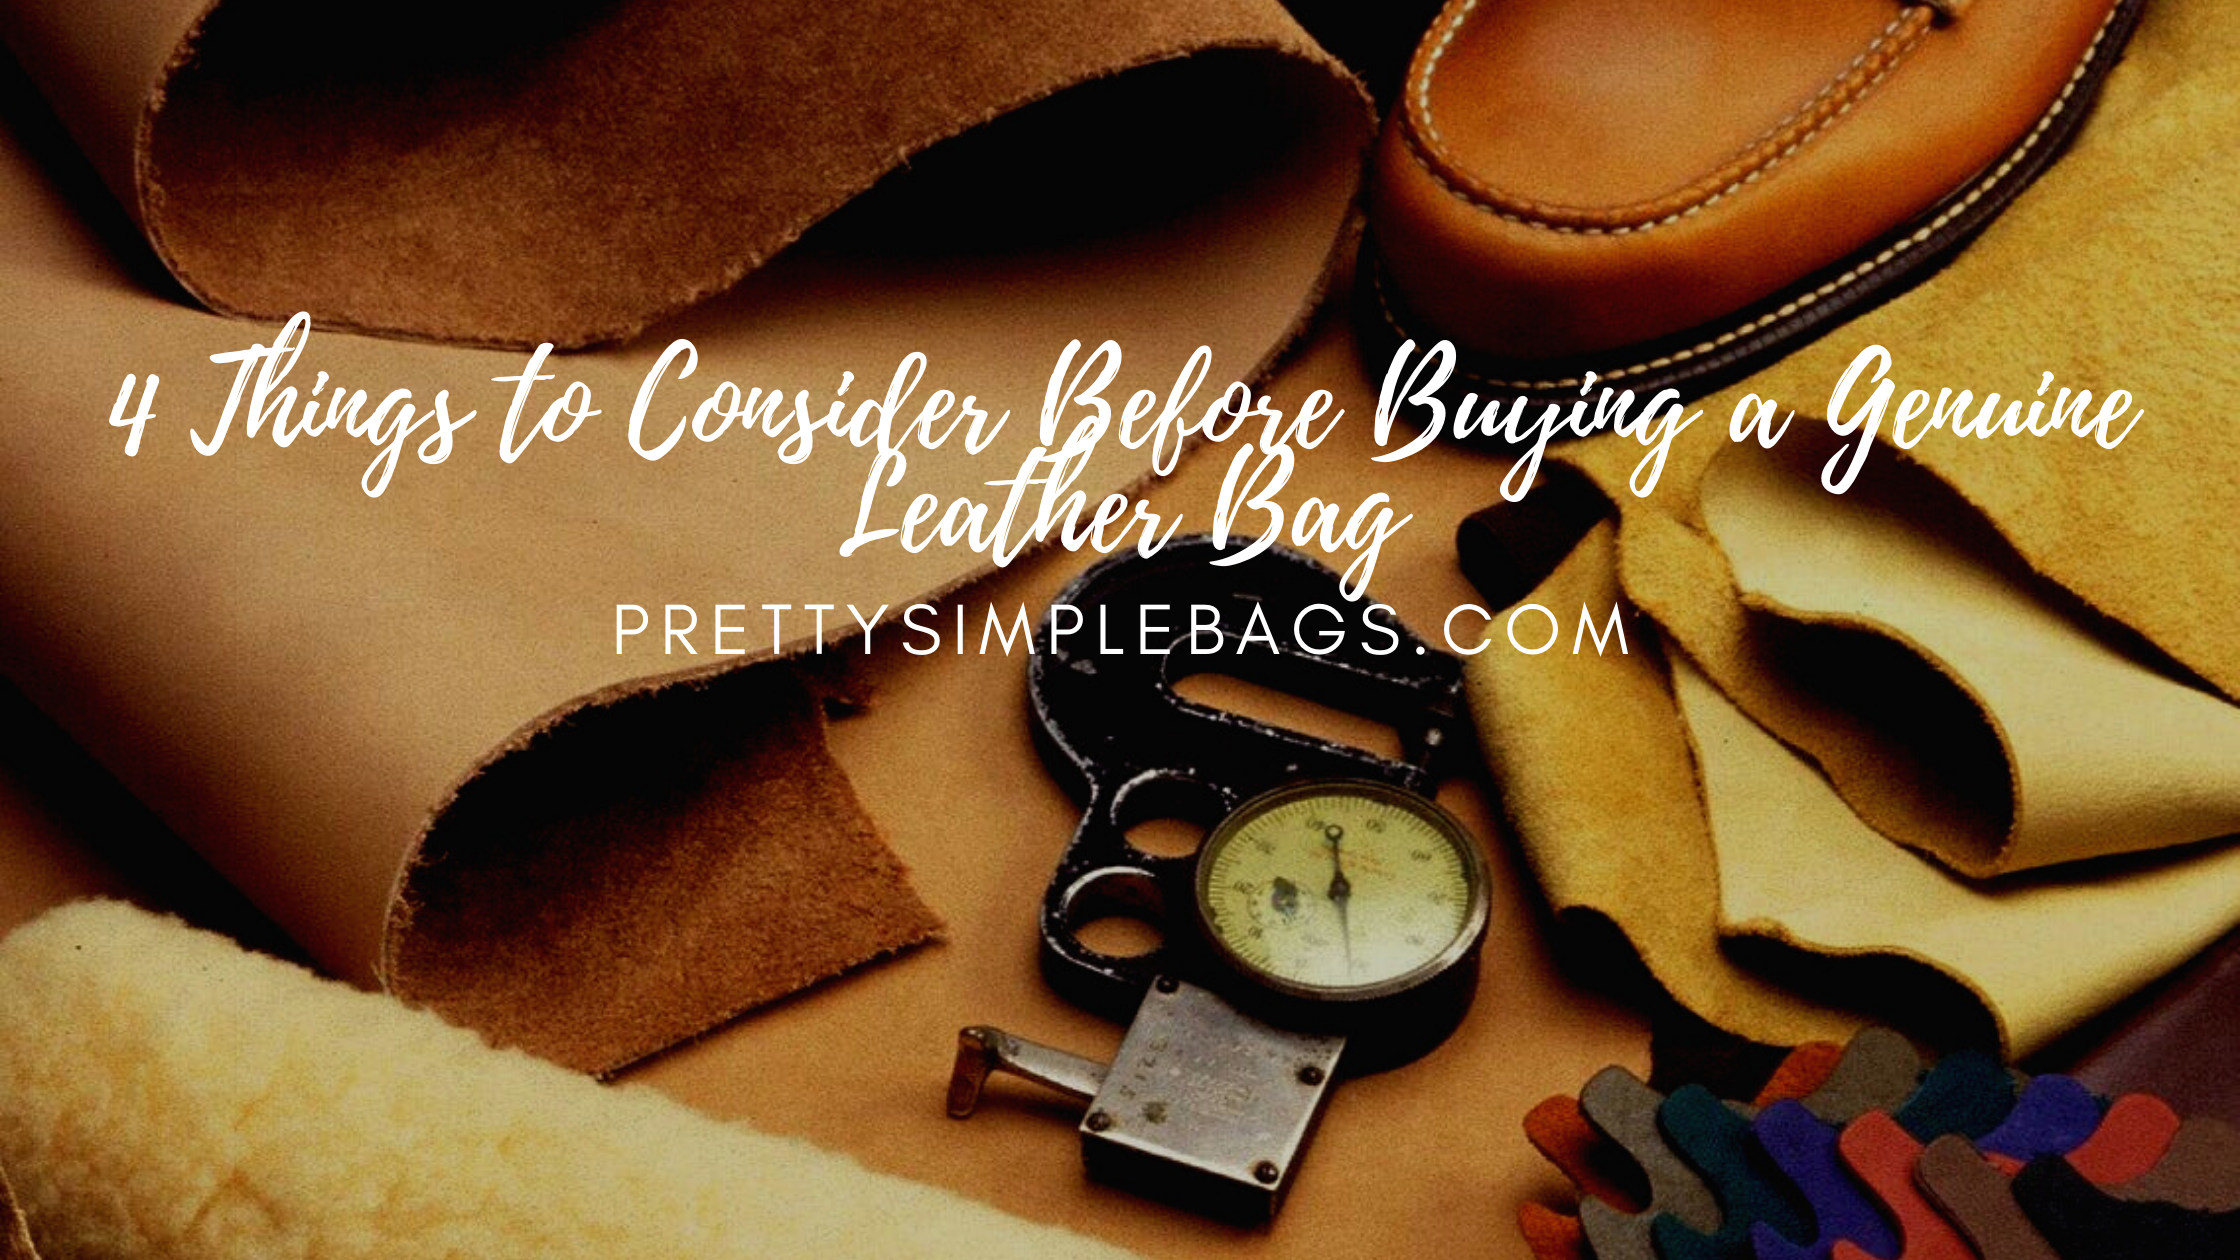 4 things to consider before buying a genuine leather bag